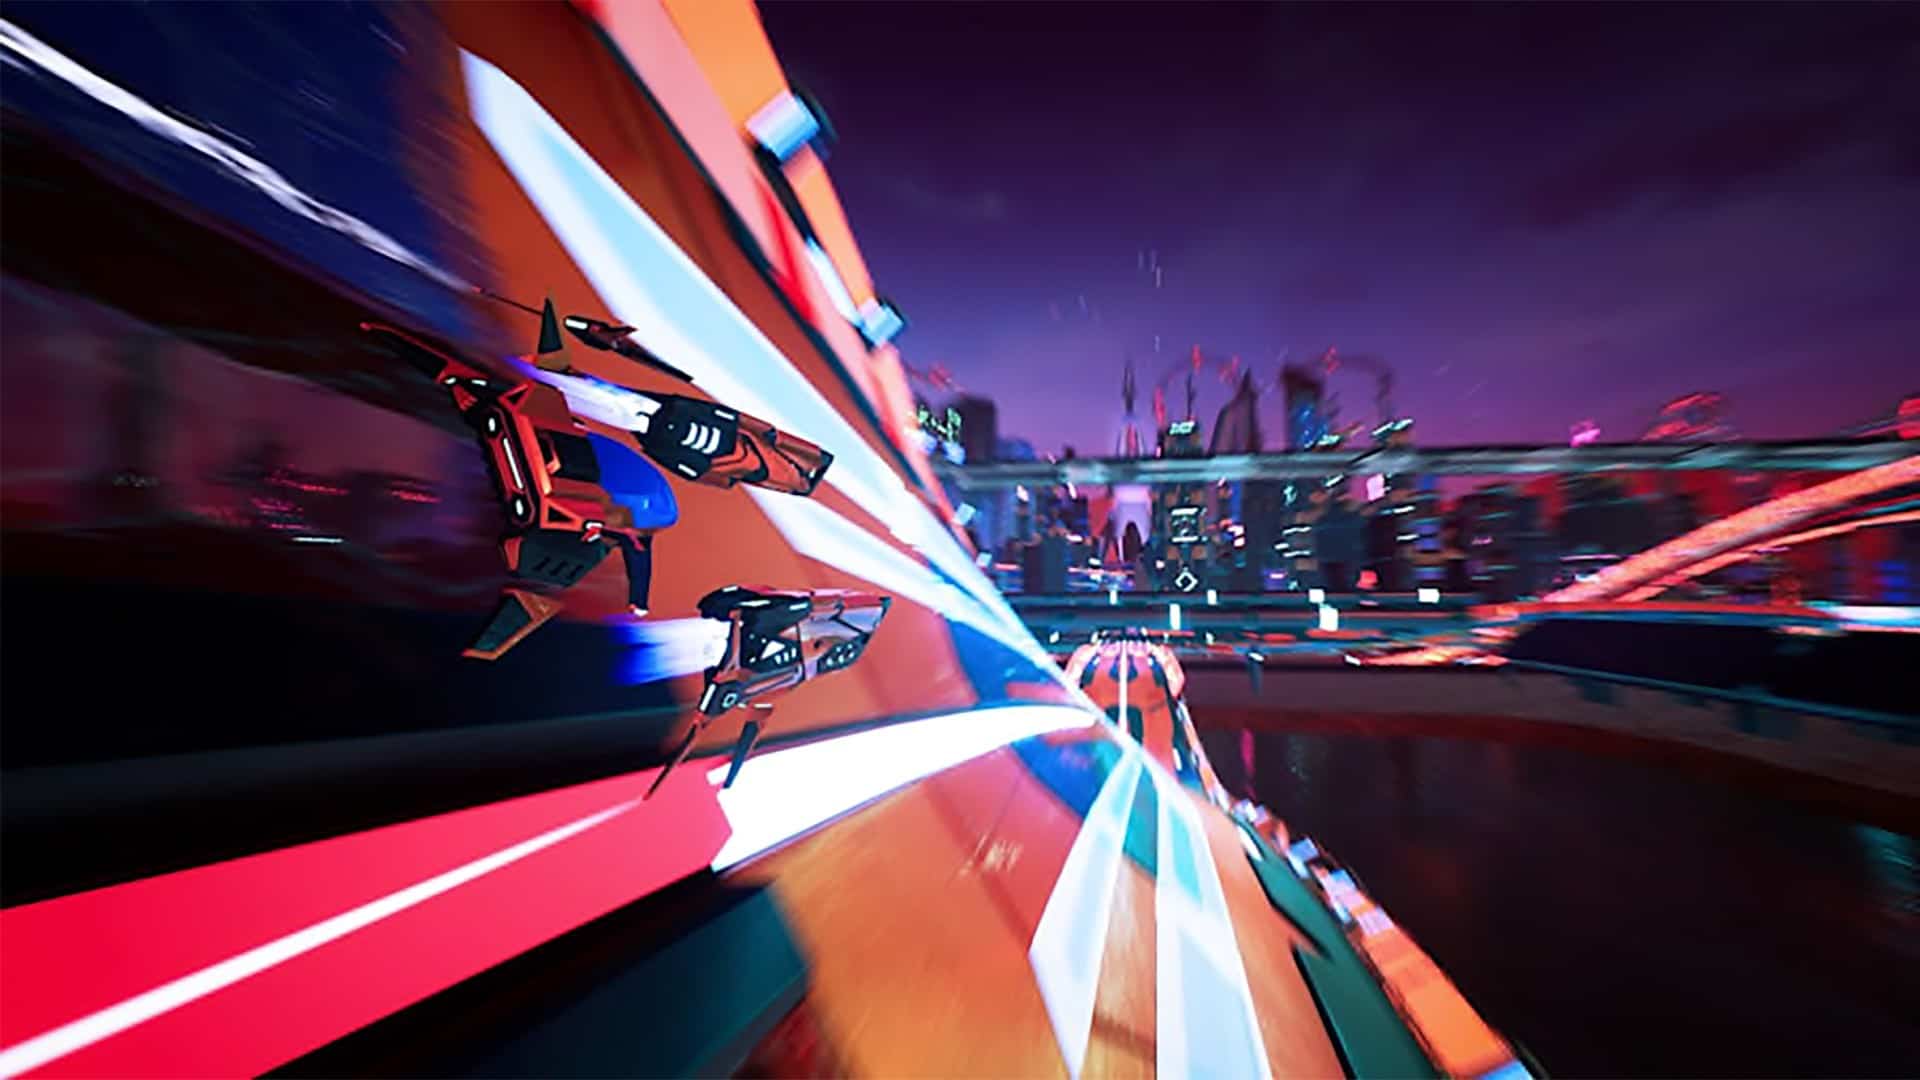 Redout 2 now available on Nintendo Switch